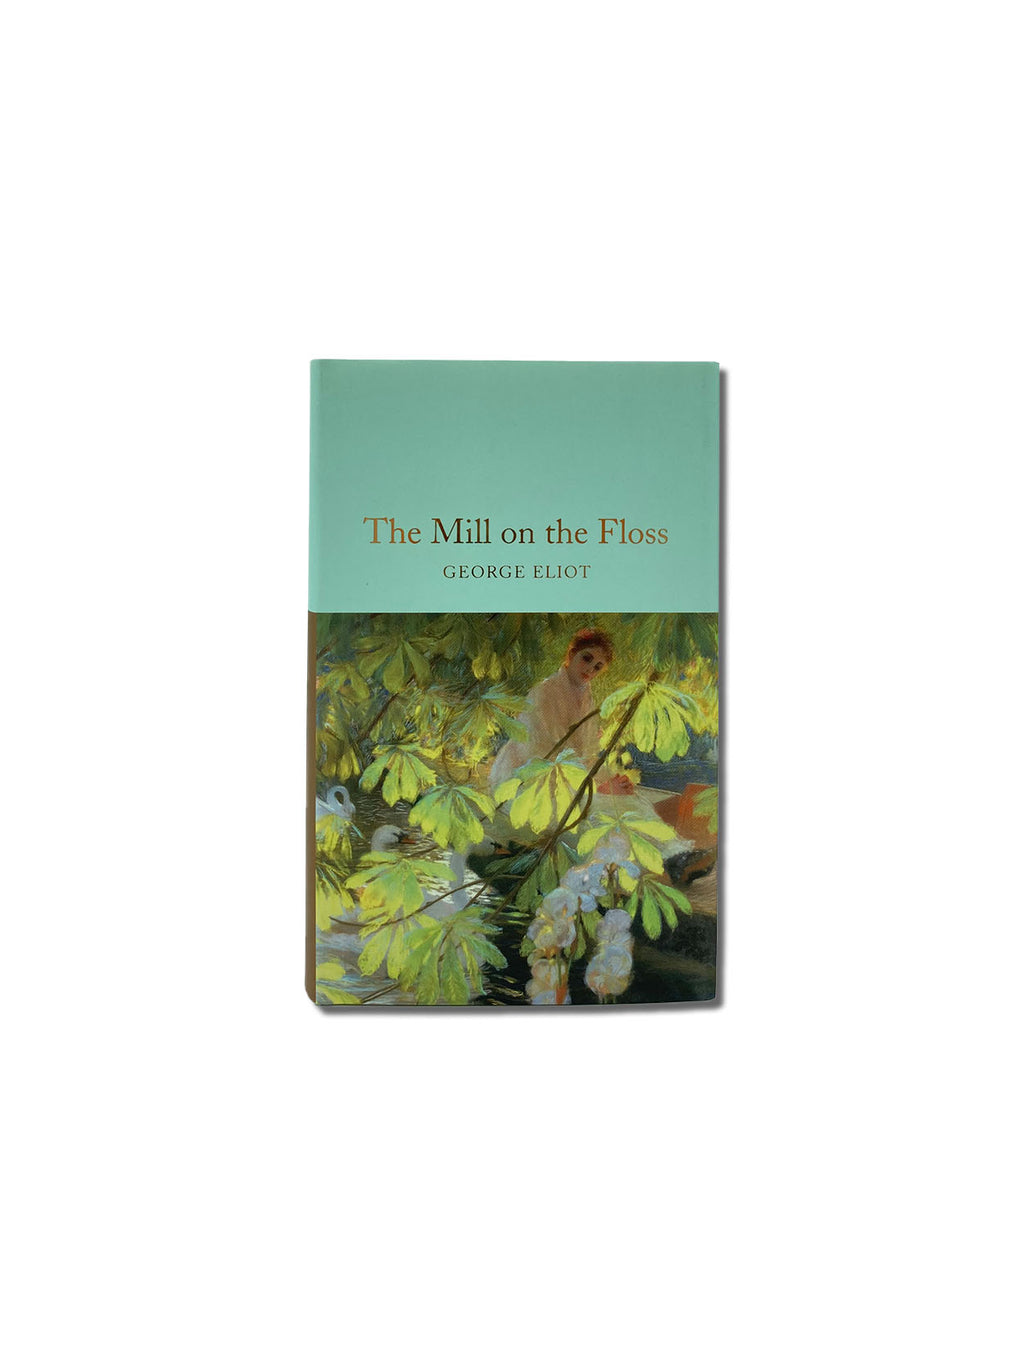 The Mill on the Floss - Macmillan Collector's Library